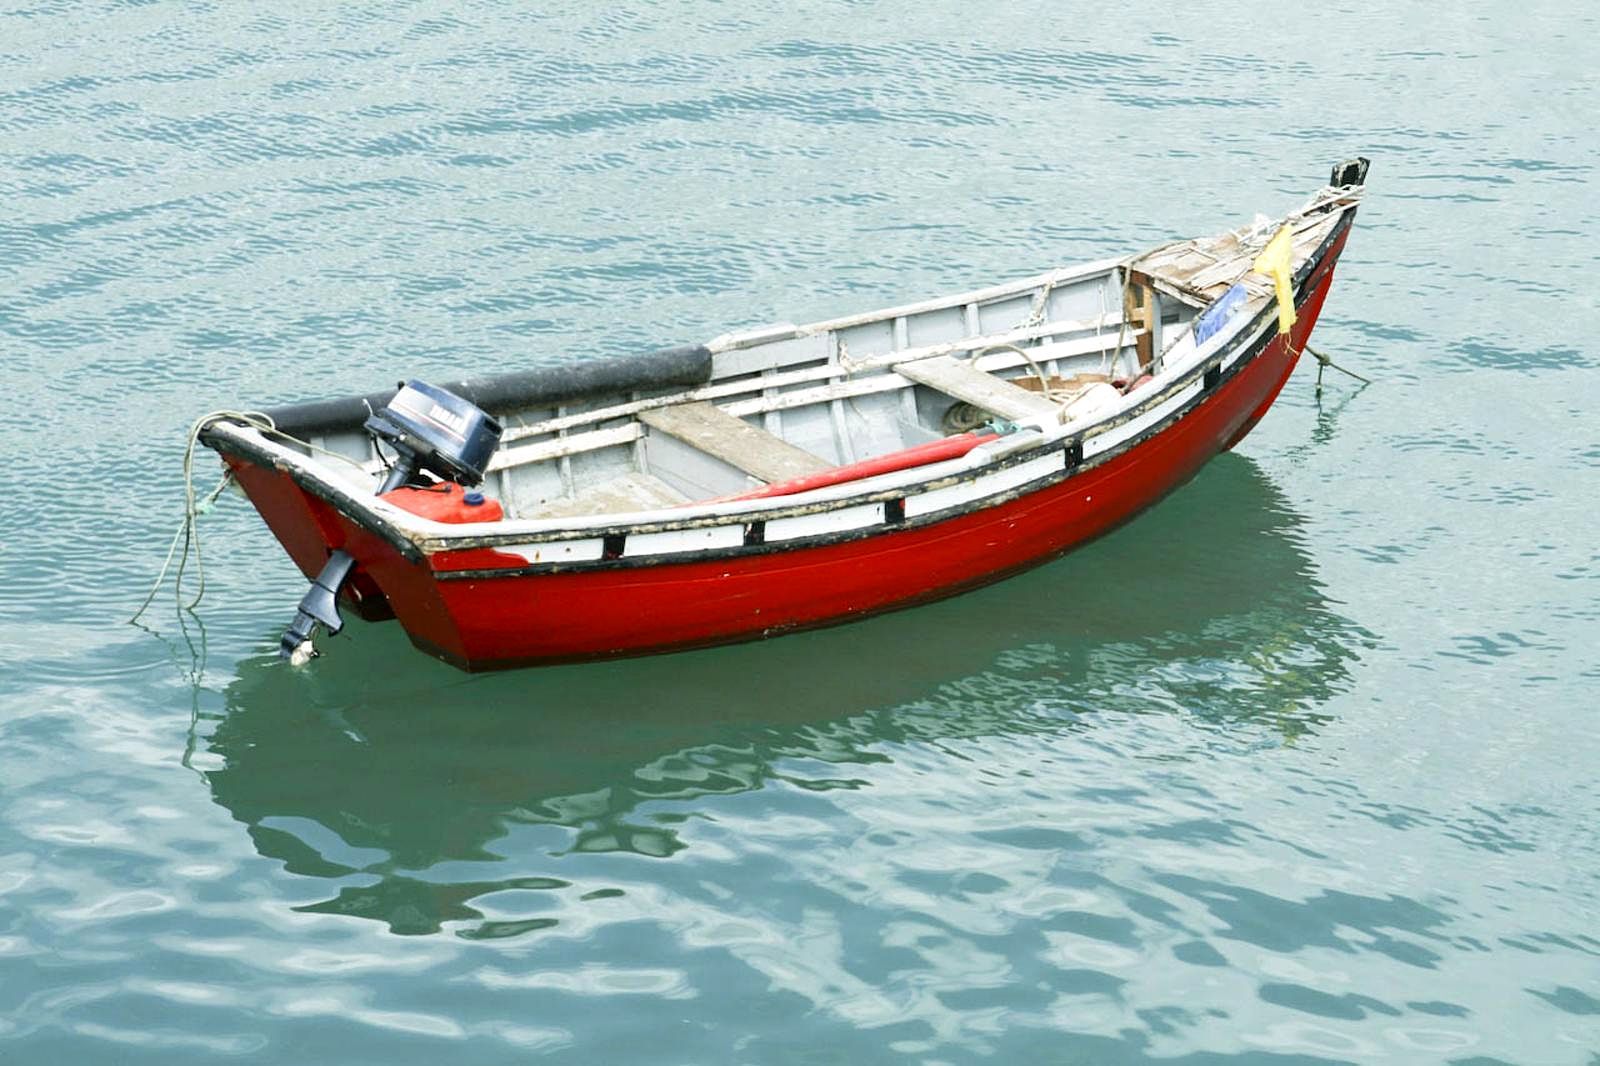 Little red boat on blue-green water